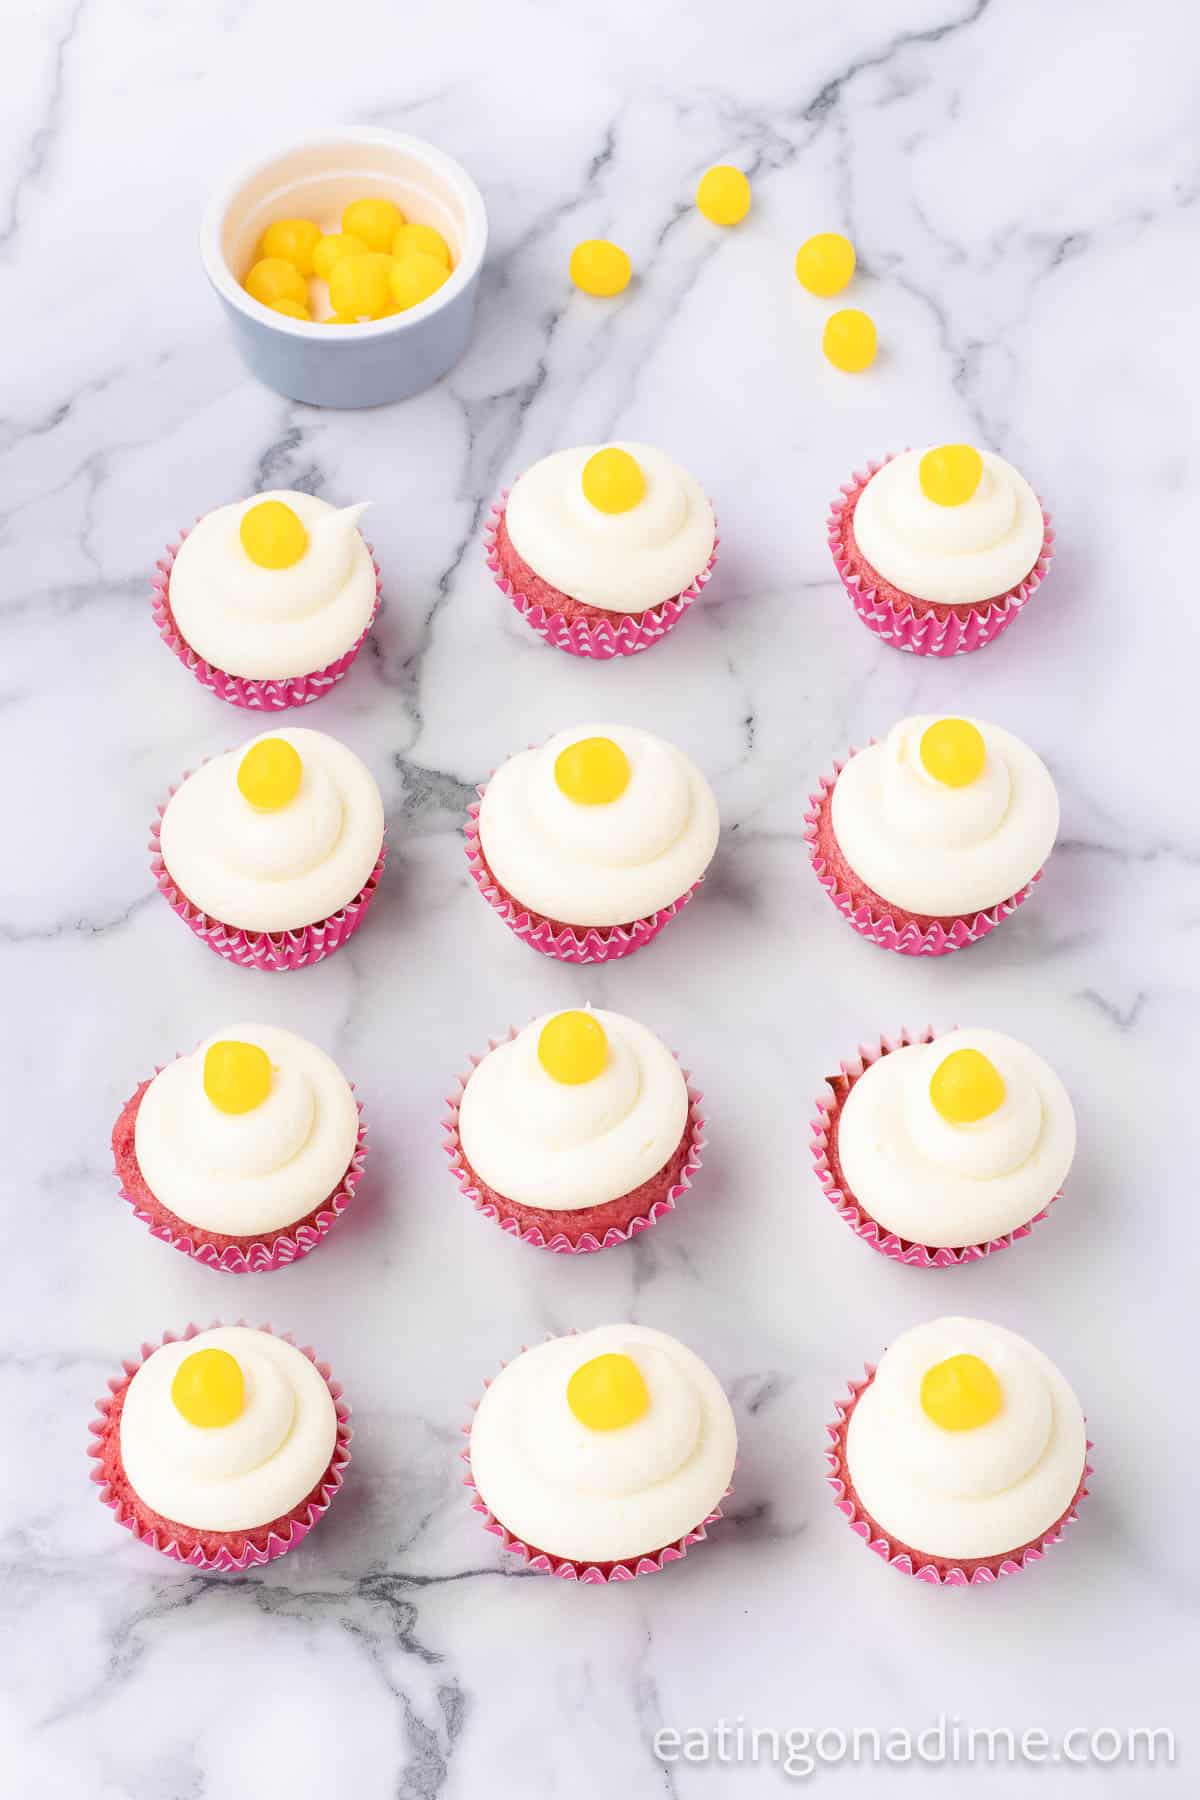 Top the frosted cupcakes with lemon candy